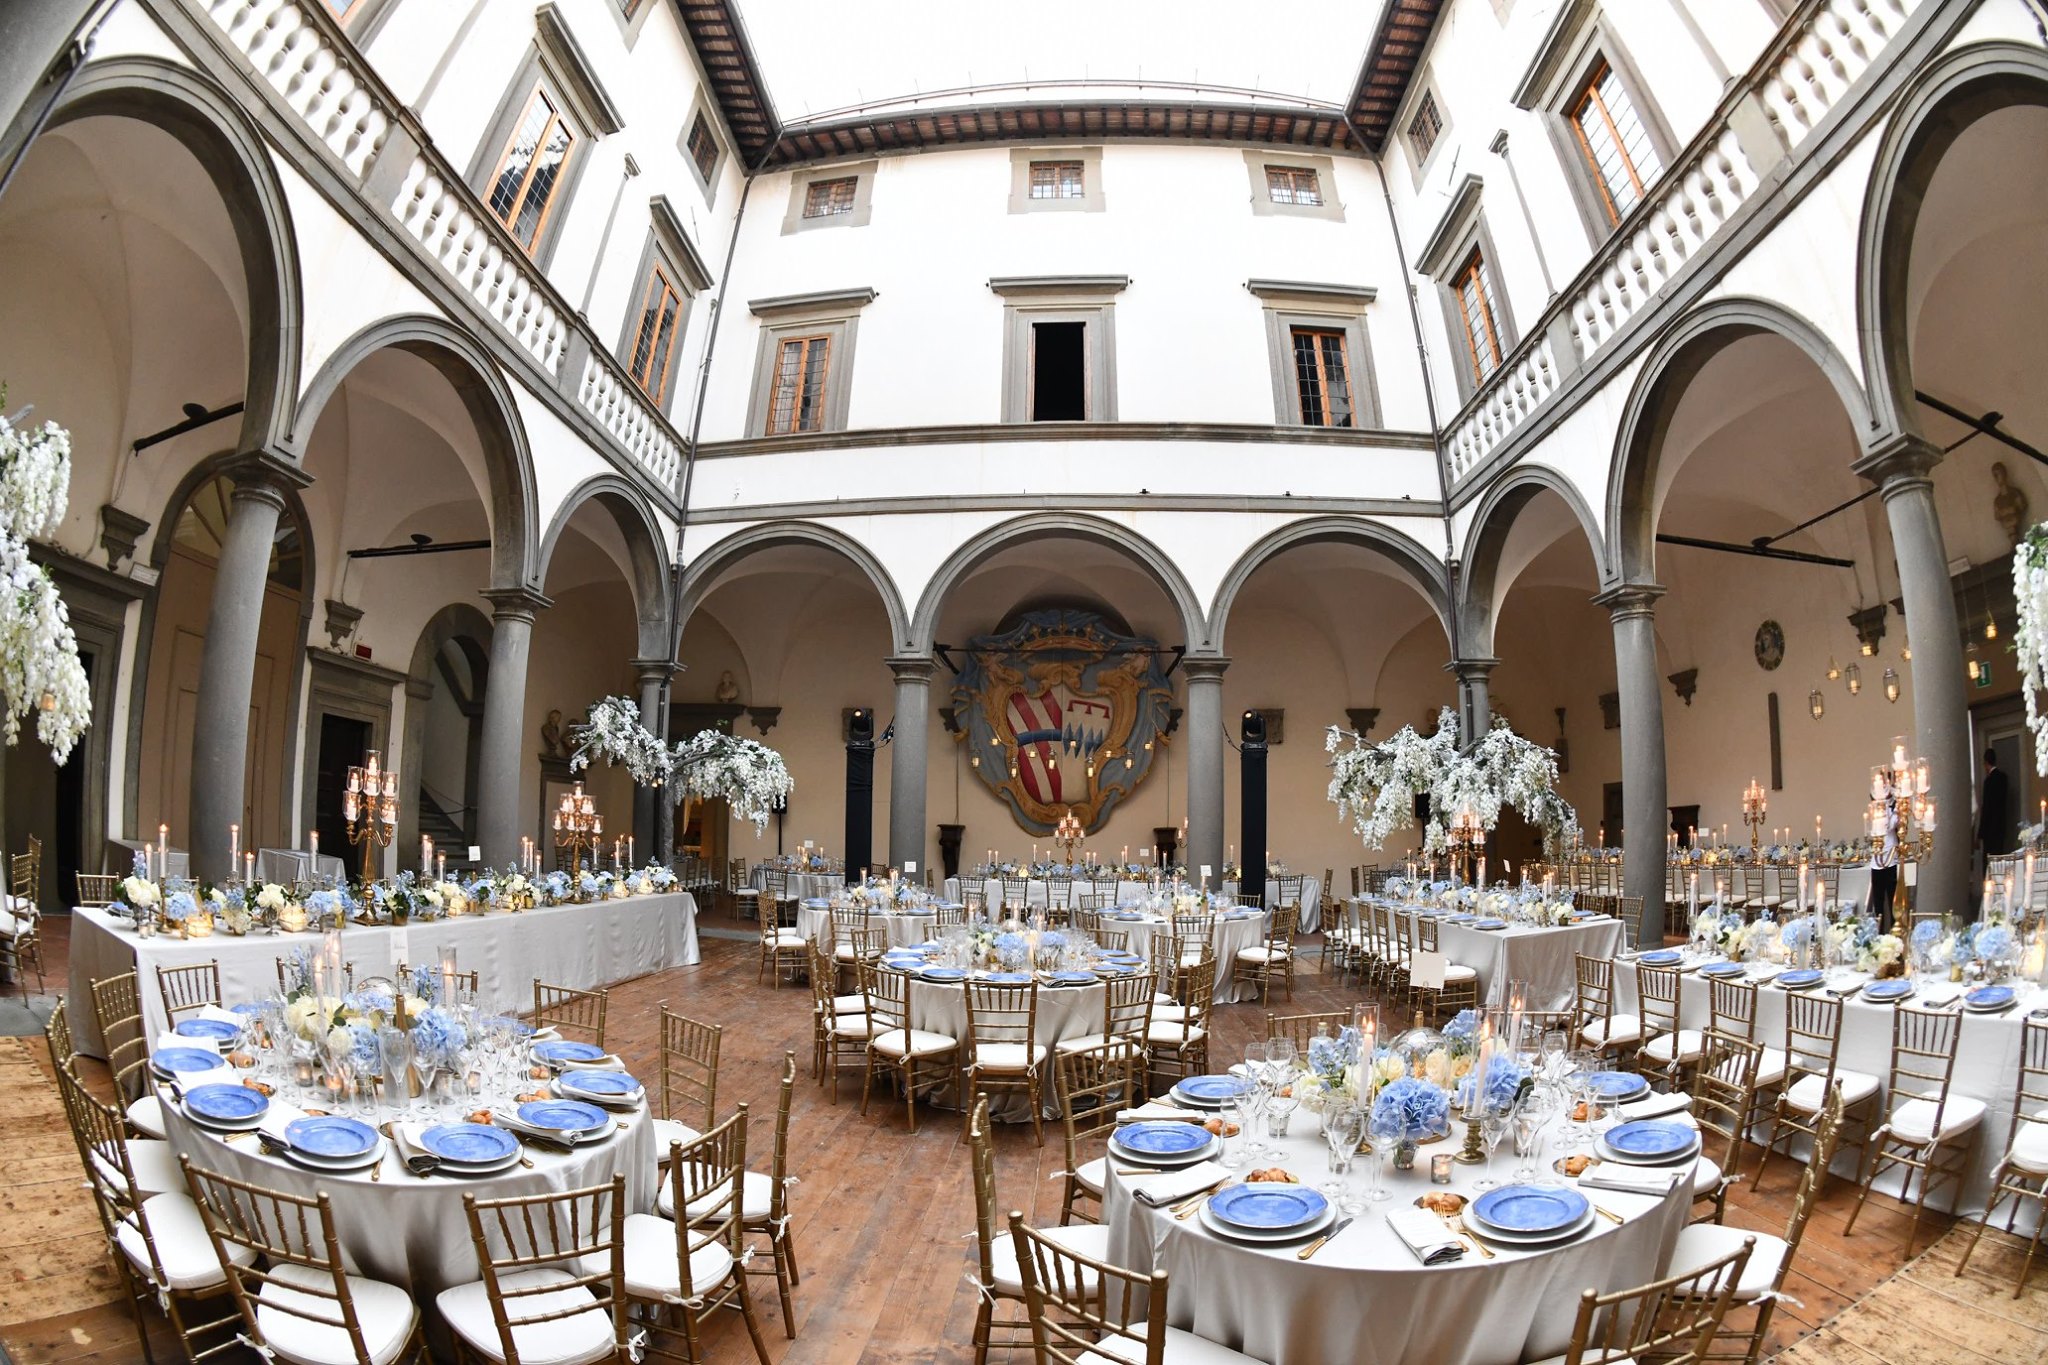 8 tips to choose the right location for your destination wedding in Italy